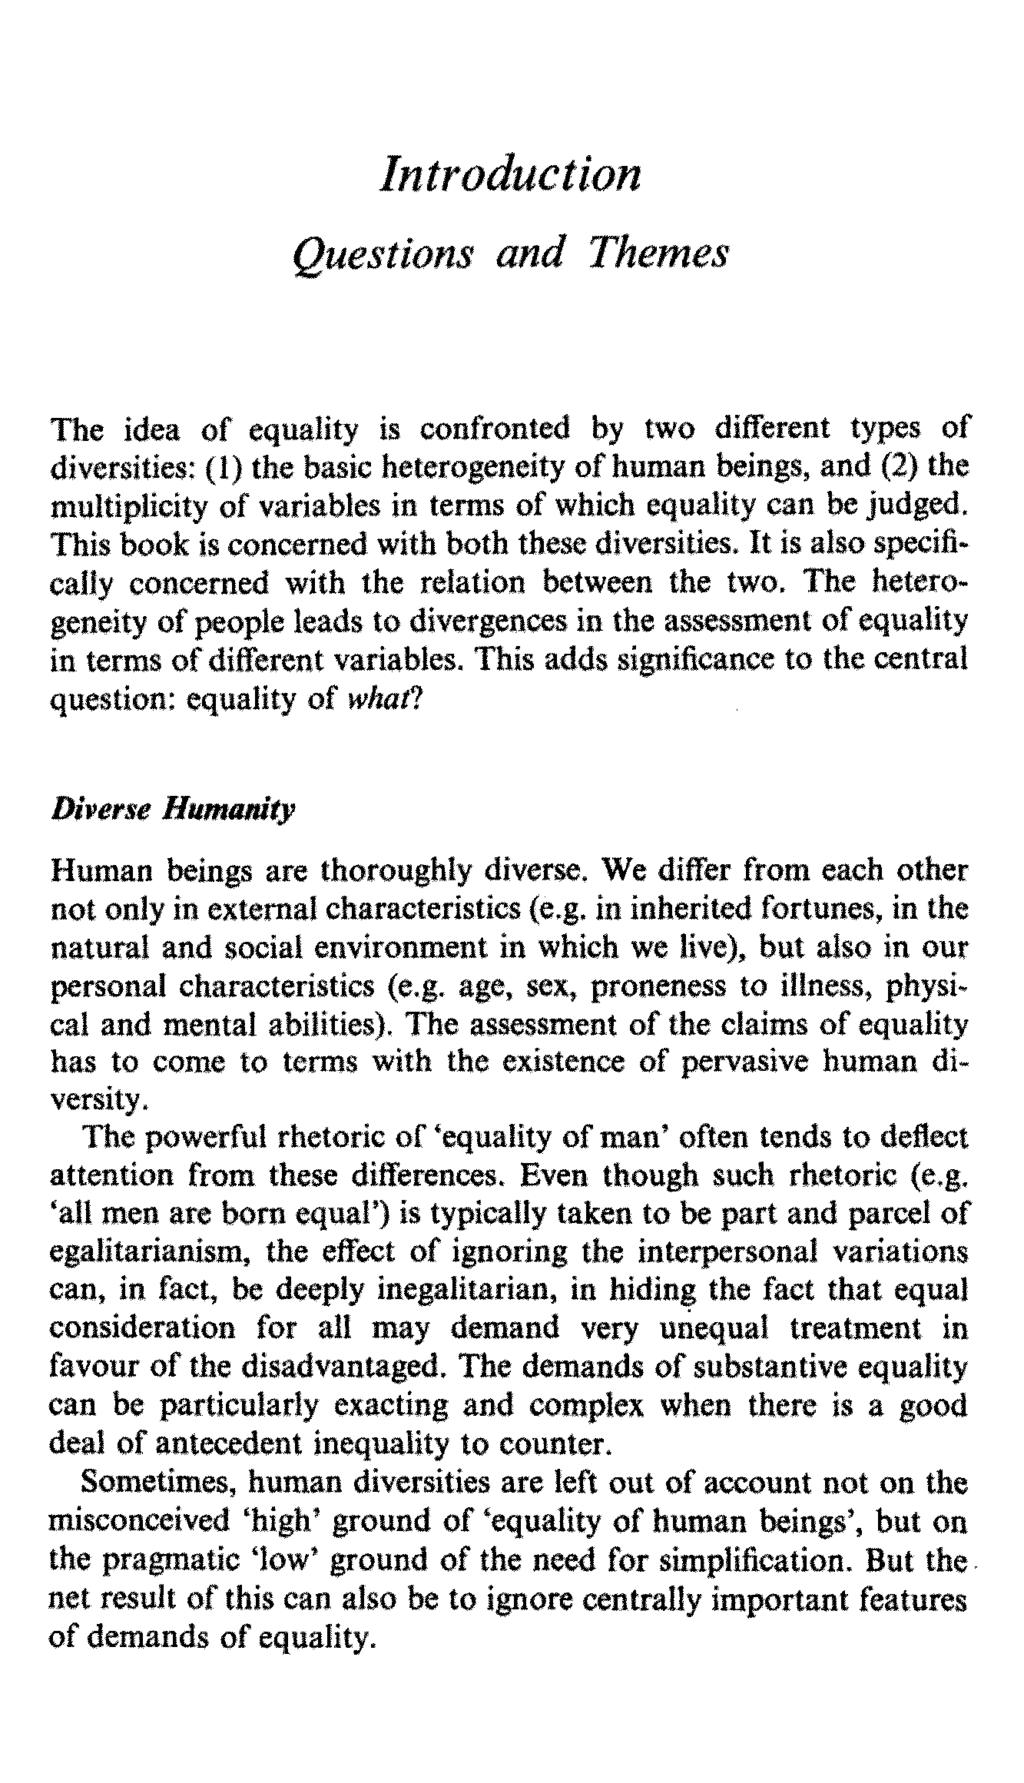 Introduction Questions and Themes The idea of equality is confronted by two different types of diversities.